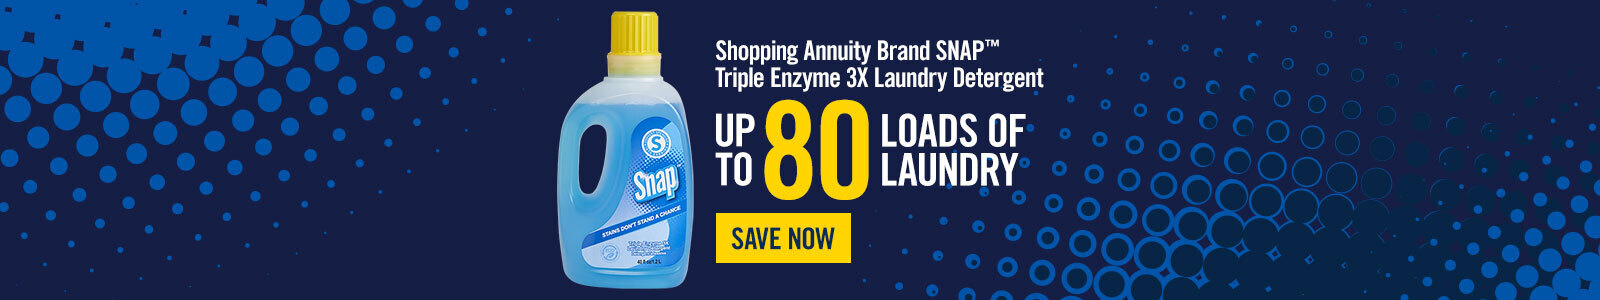 Shopping Annuity Brand SNAP™ Triple Enzyme 3X Laundry Detergent . up to 80 loads of laundry . Save Now